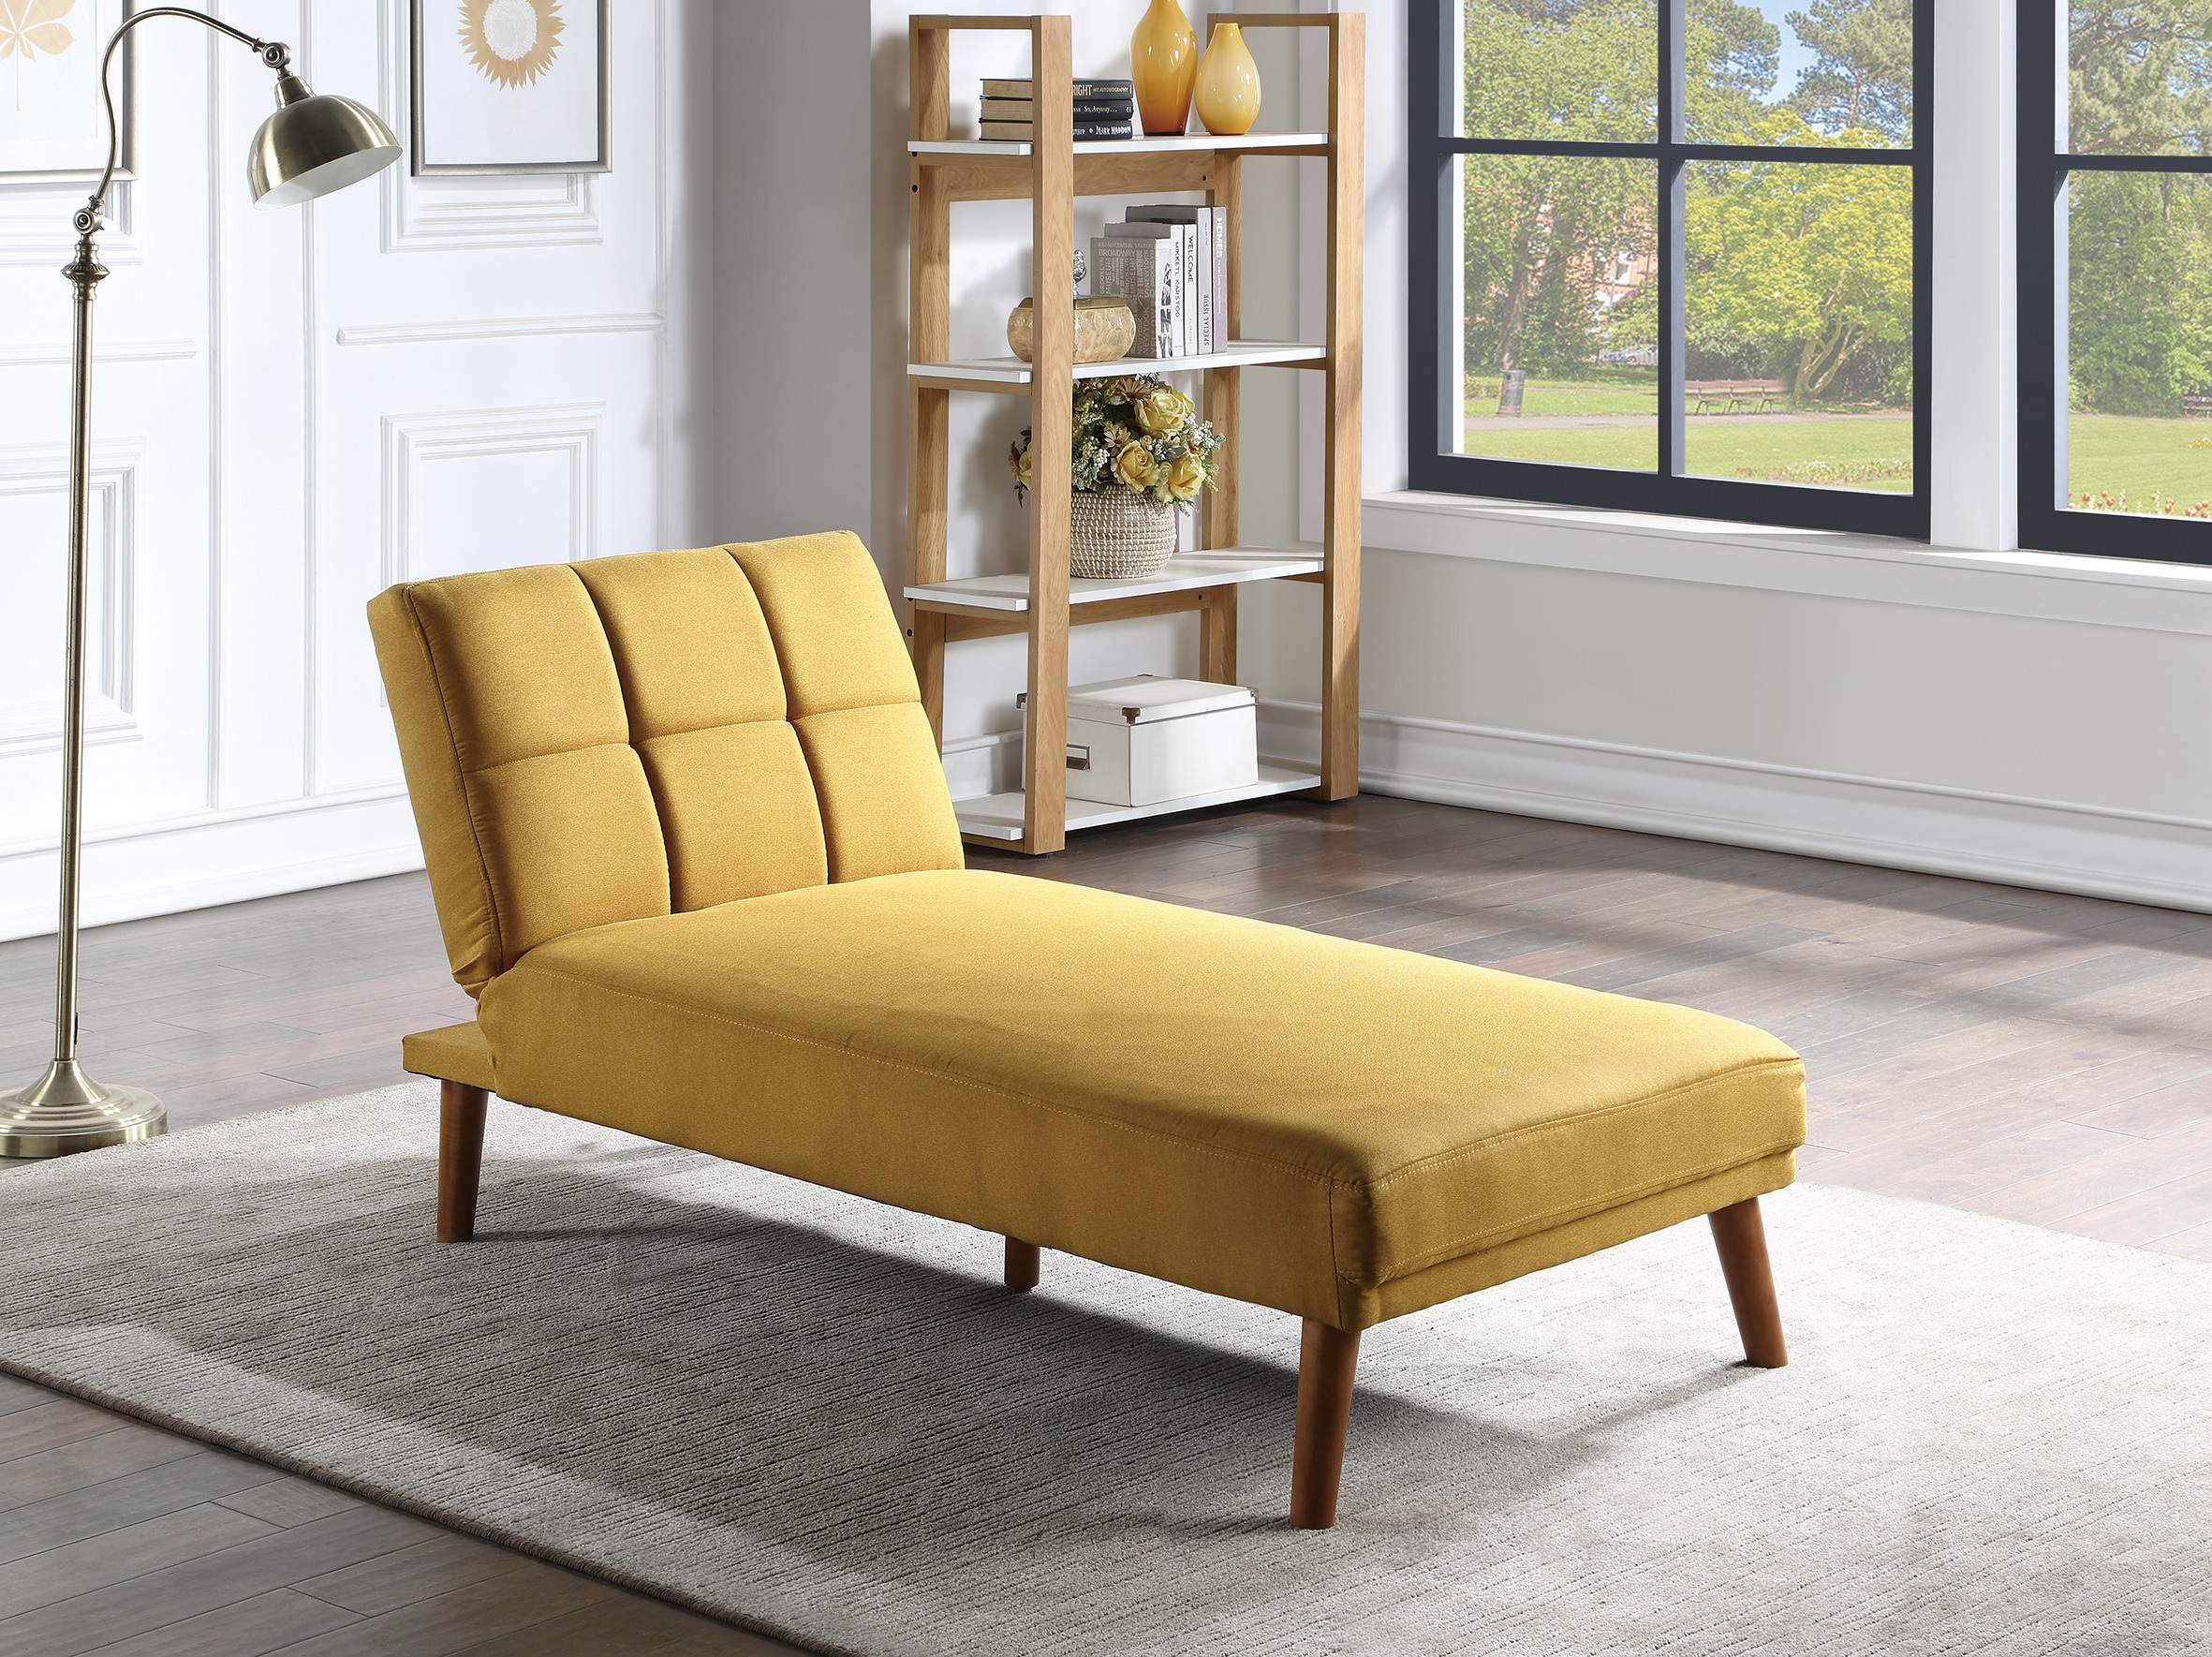 Mustard Polyfiber Adjustable Chaise Bed Living Room Solid wood Legs Tufted Comfort Couch-Boyel Living